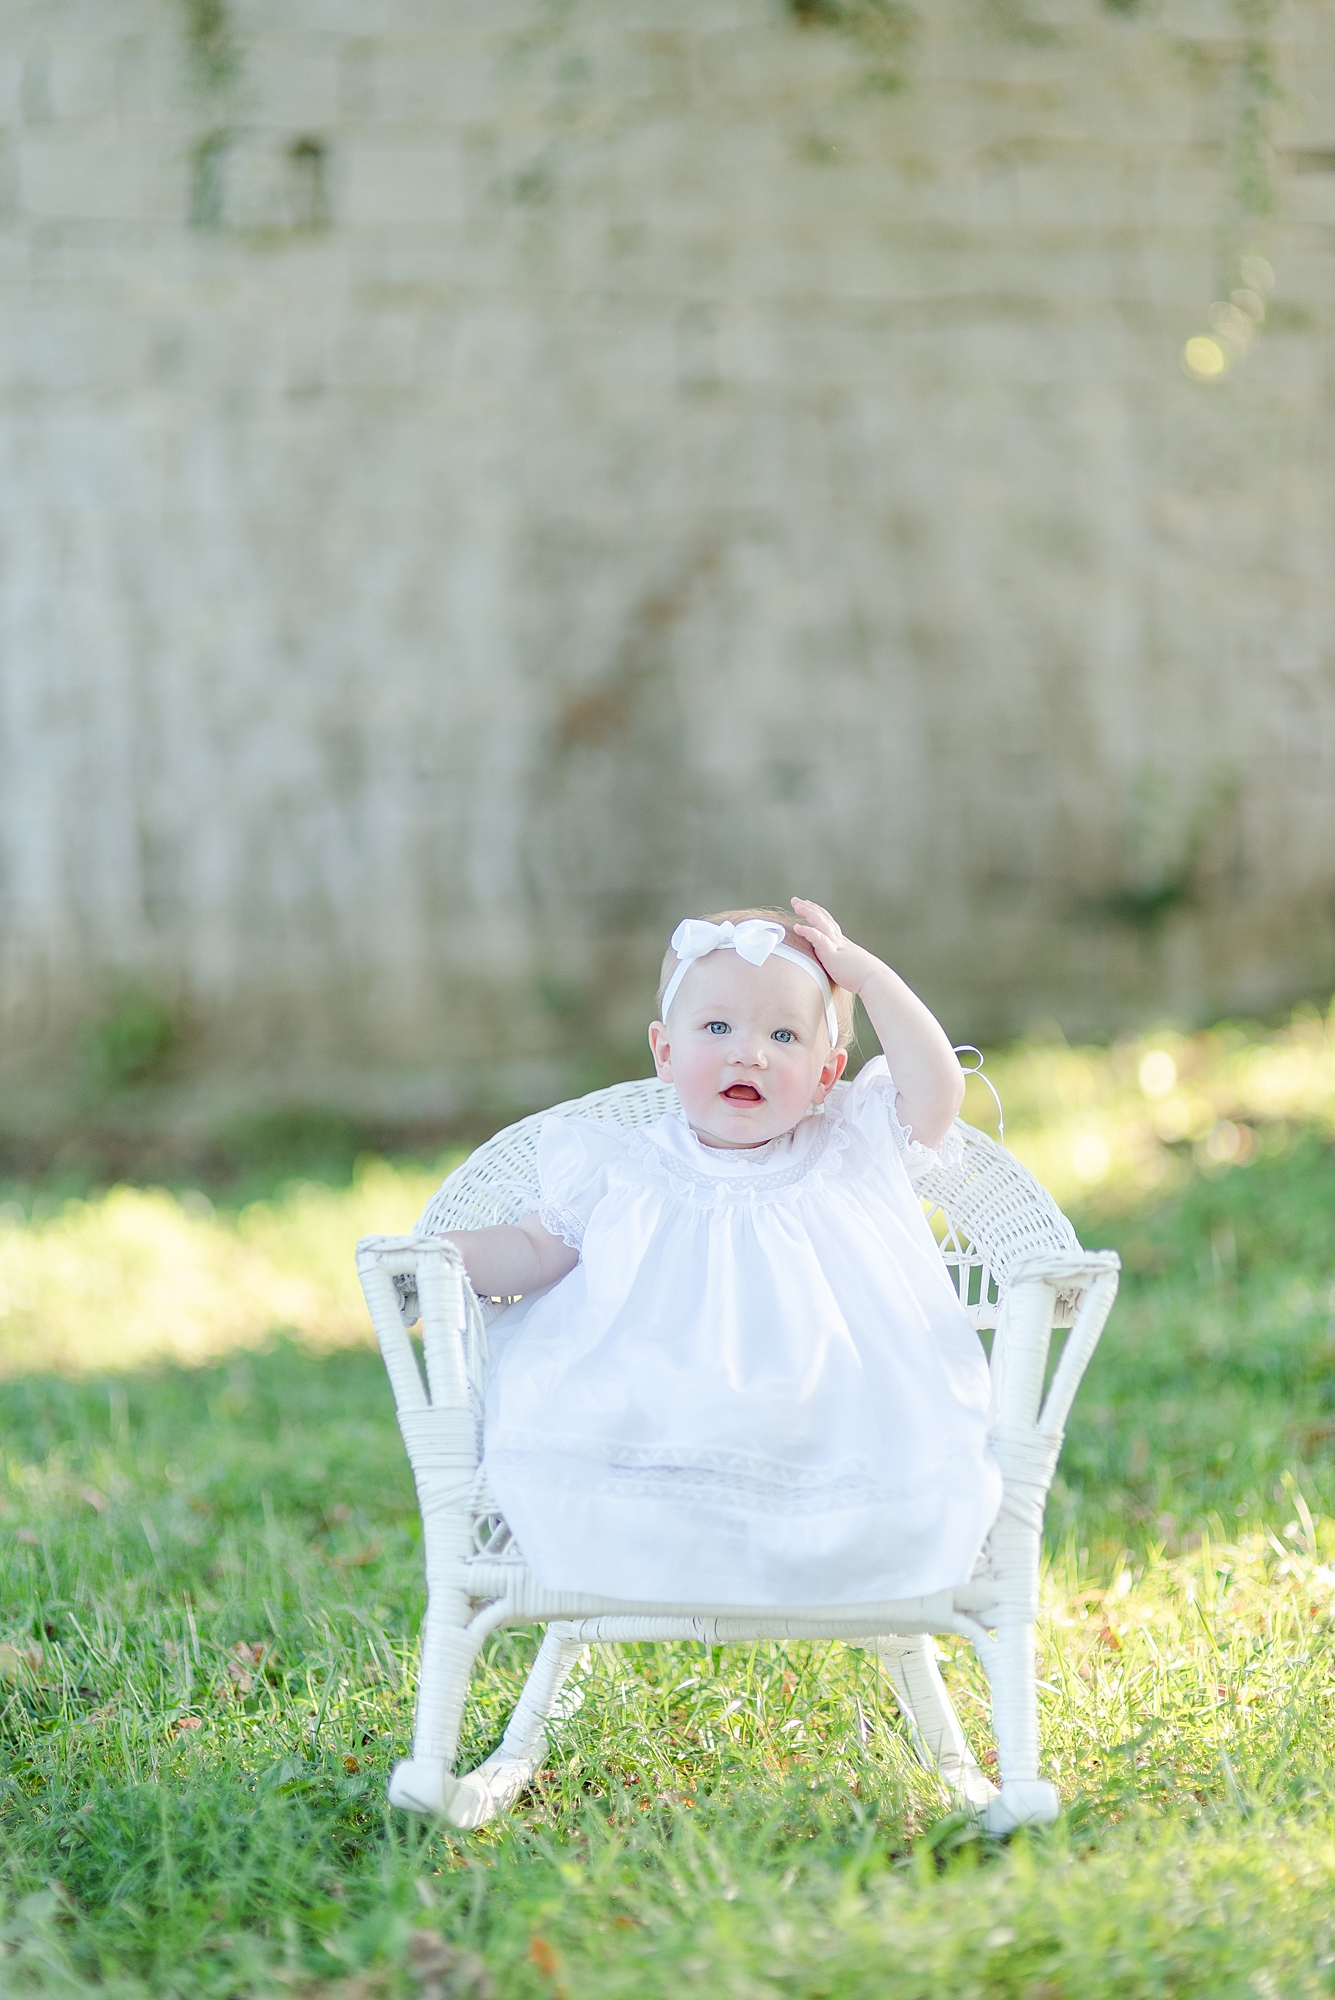 One Year Old wearing a white dress sitting in a wicker chair for her One Year Portraits in Nashville, TN